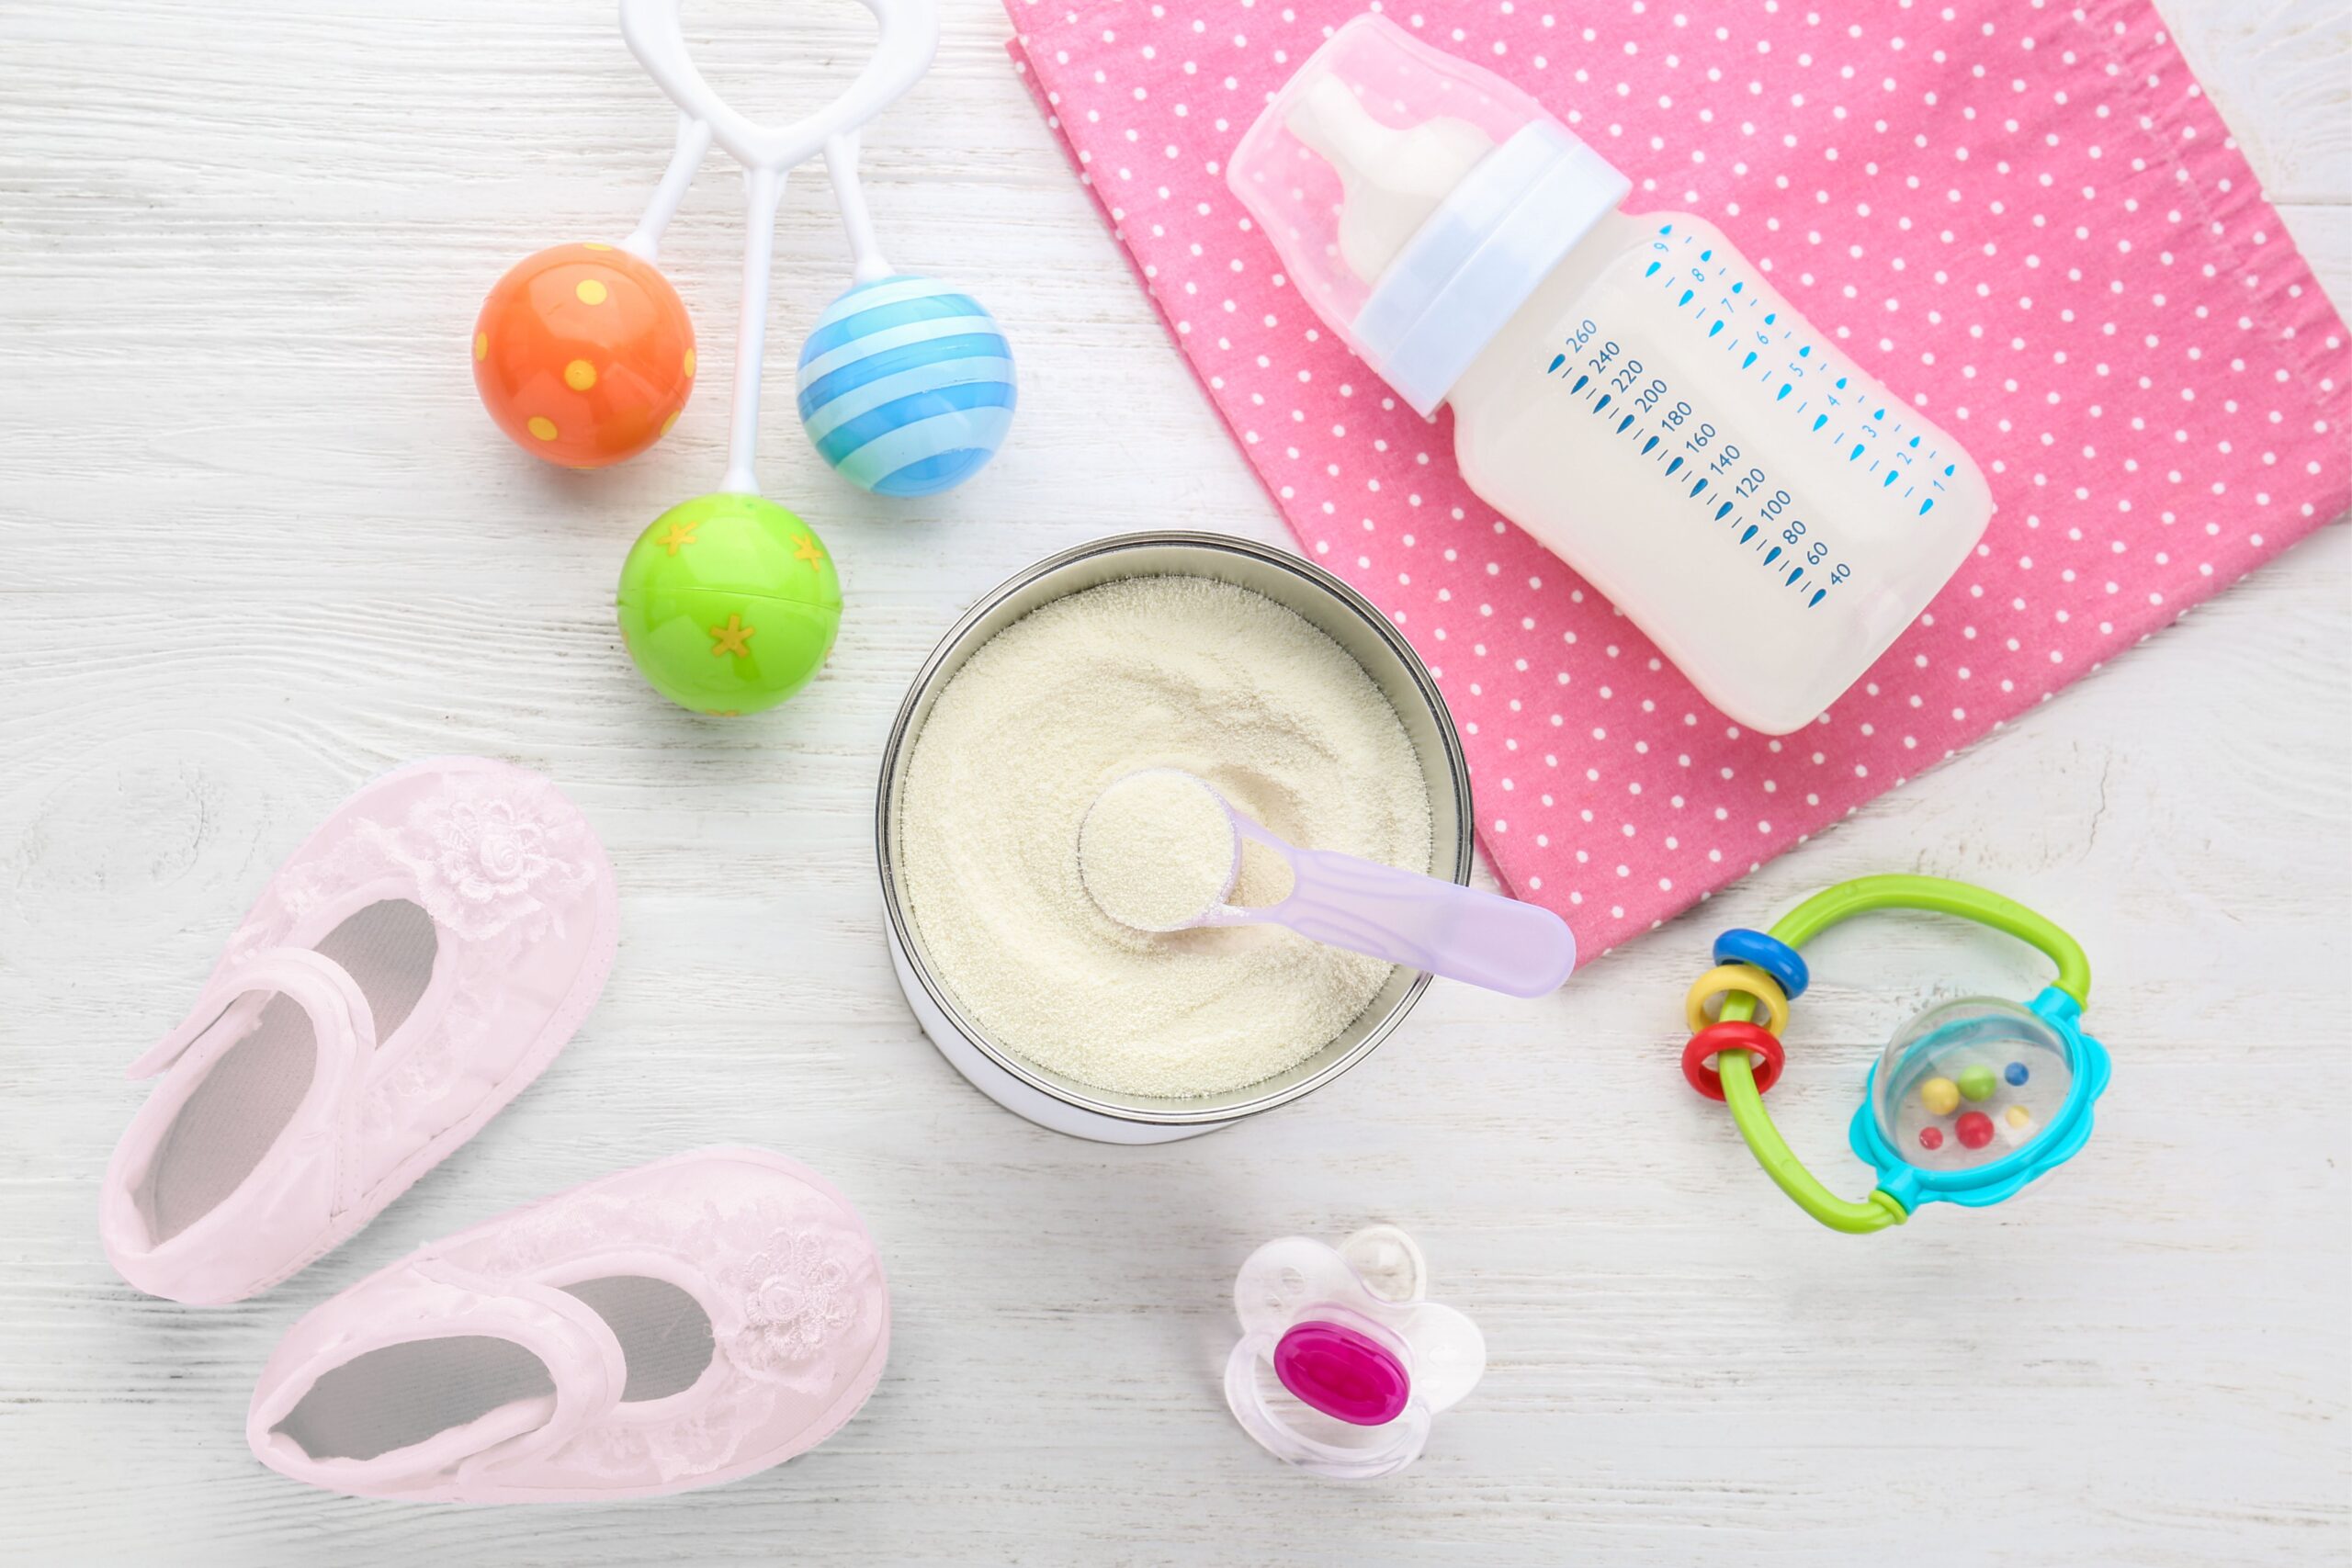 Baby-Led-Weaning-and-baby-food-portions